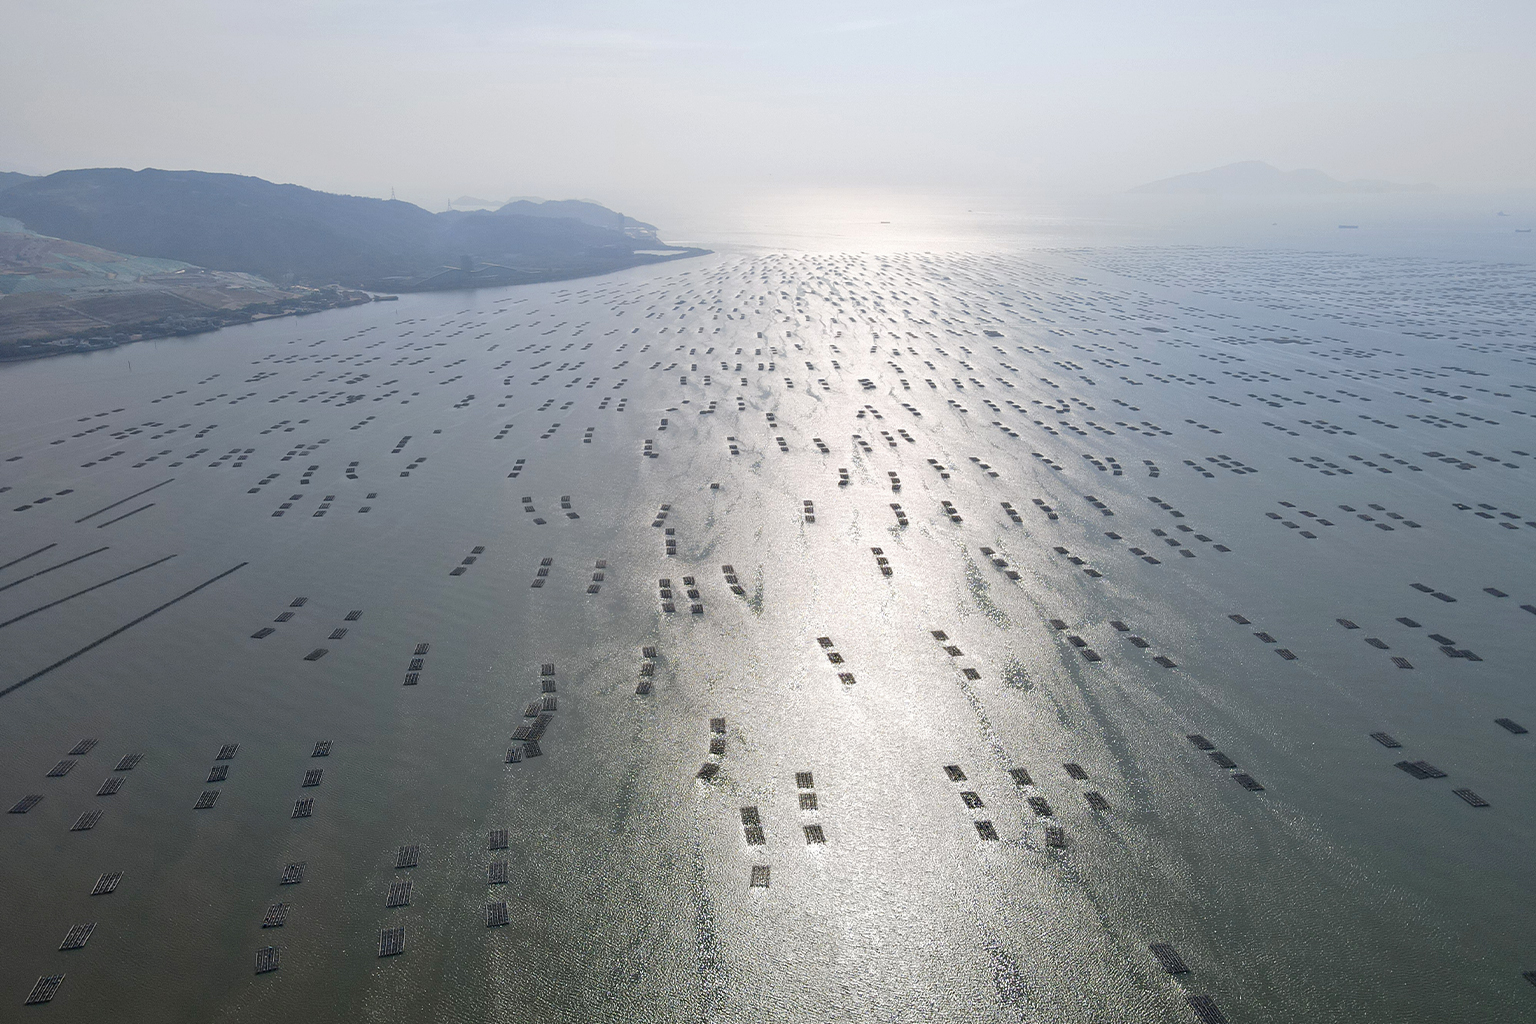 Thousands of oyster farming rafts. 